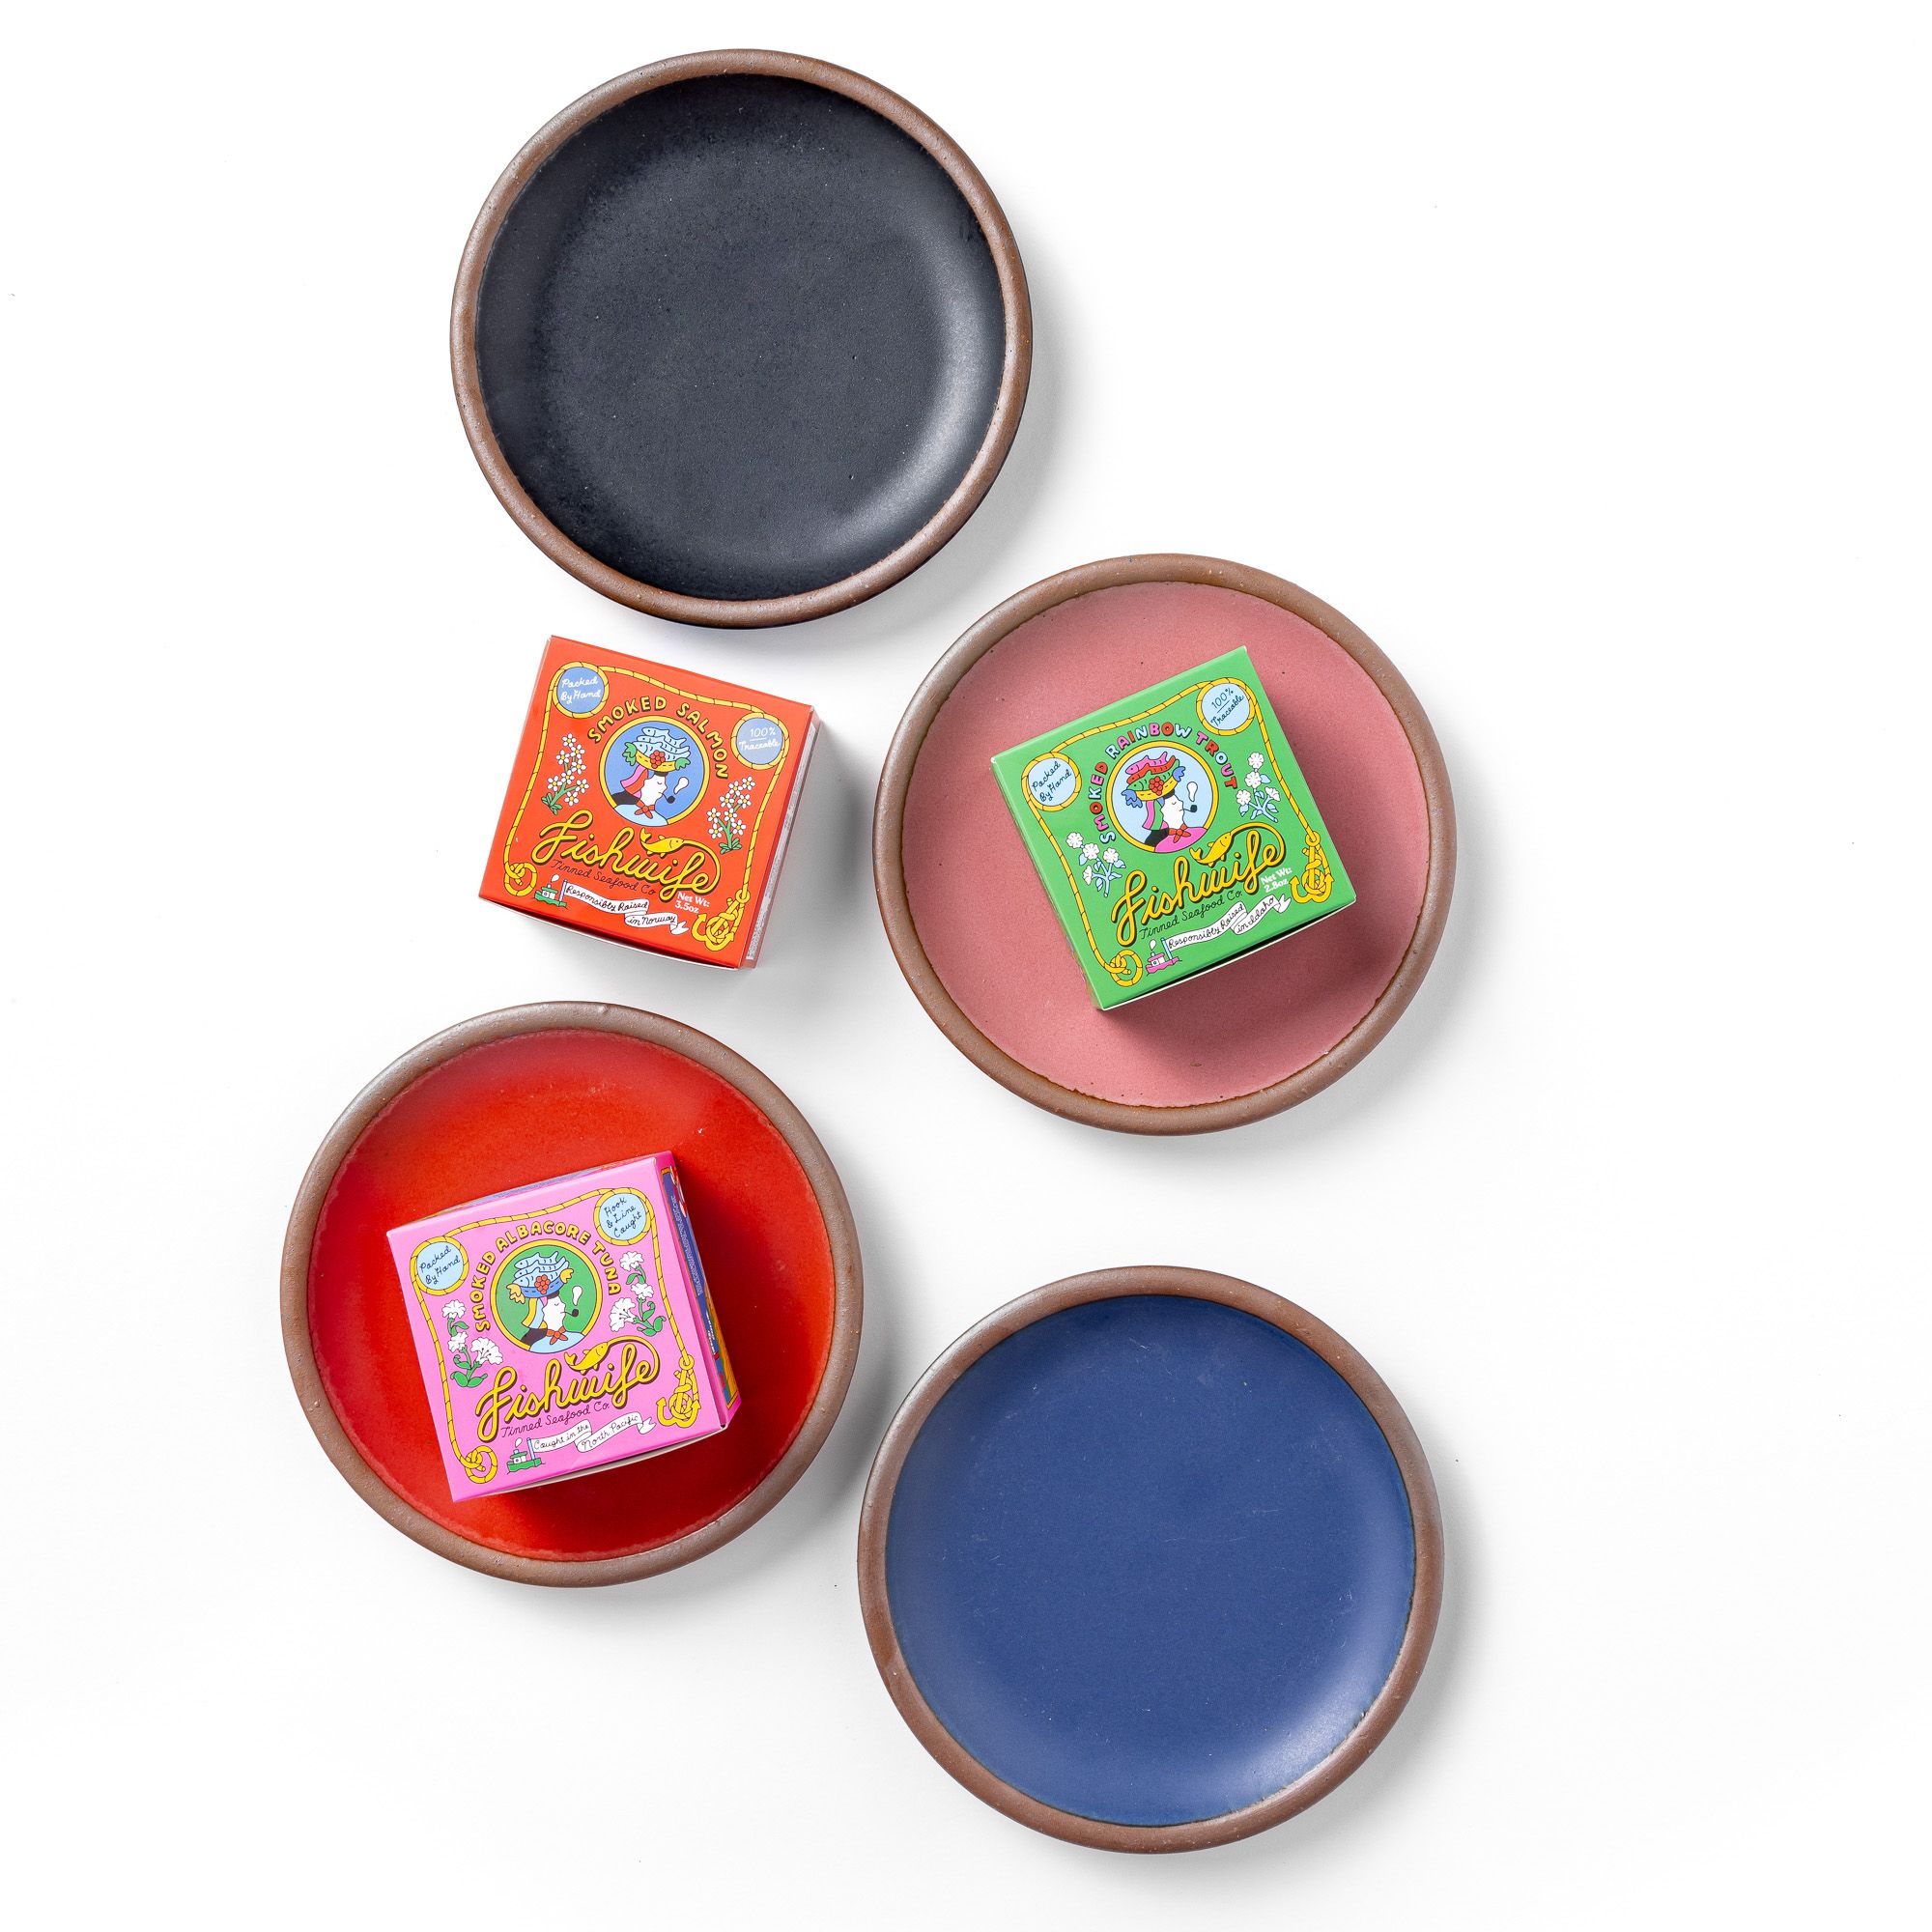 4 small ceramic plates are next to each other in blue, red, pink and black colors. On top and beside them are 3 boxes of tinned fish in pink, orange, and green colors